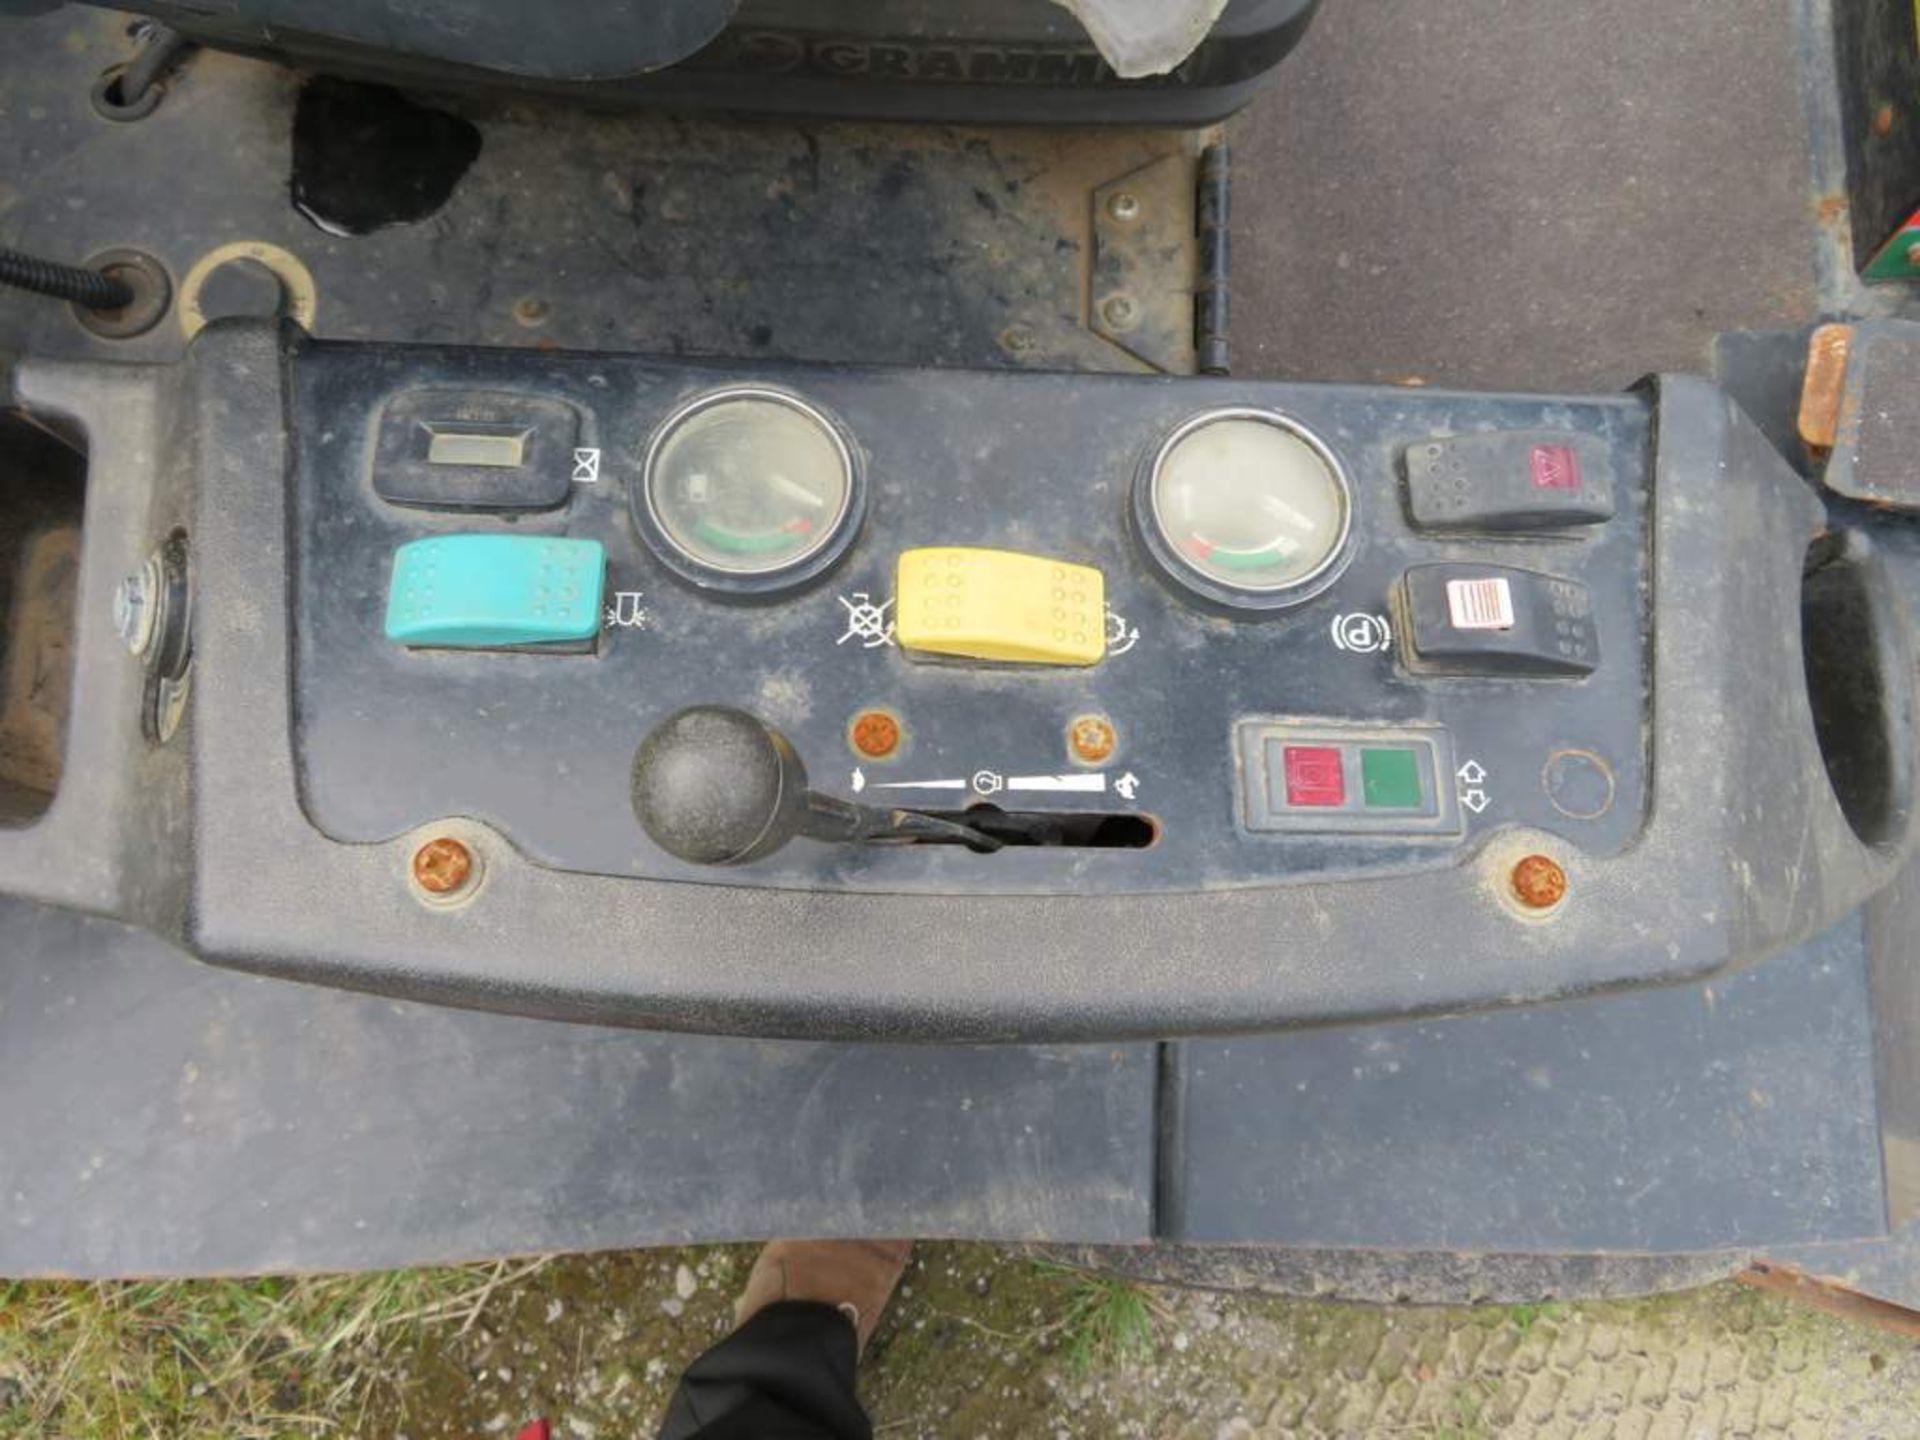 2009 Ransomes HR 3300T Out Front Cutting Deck Mower - FX09 ABF - Image 9 of 16